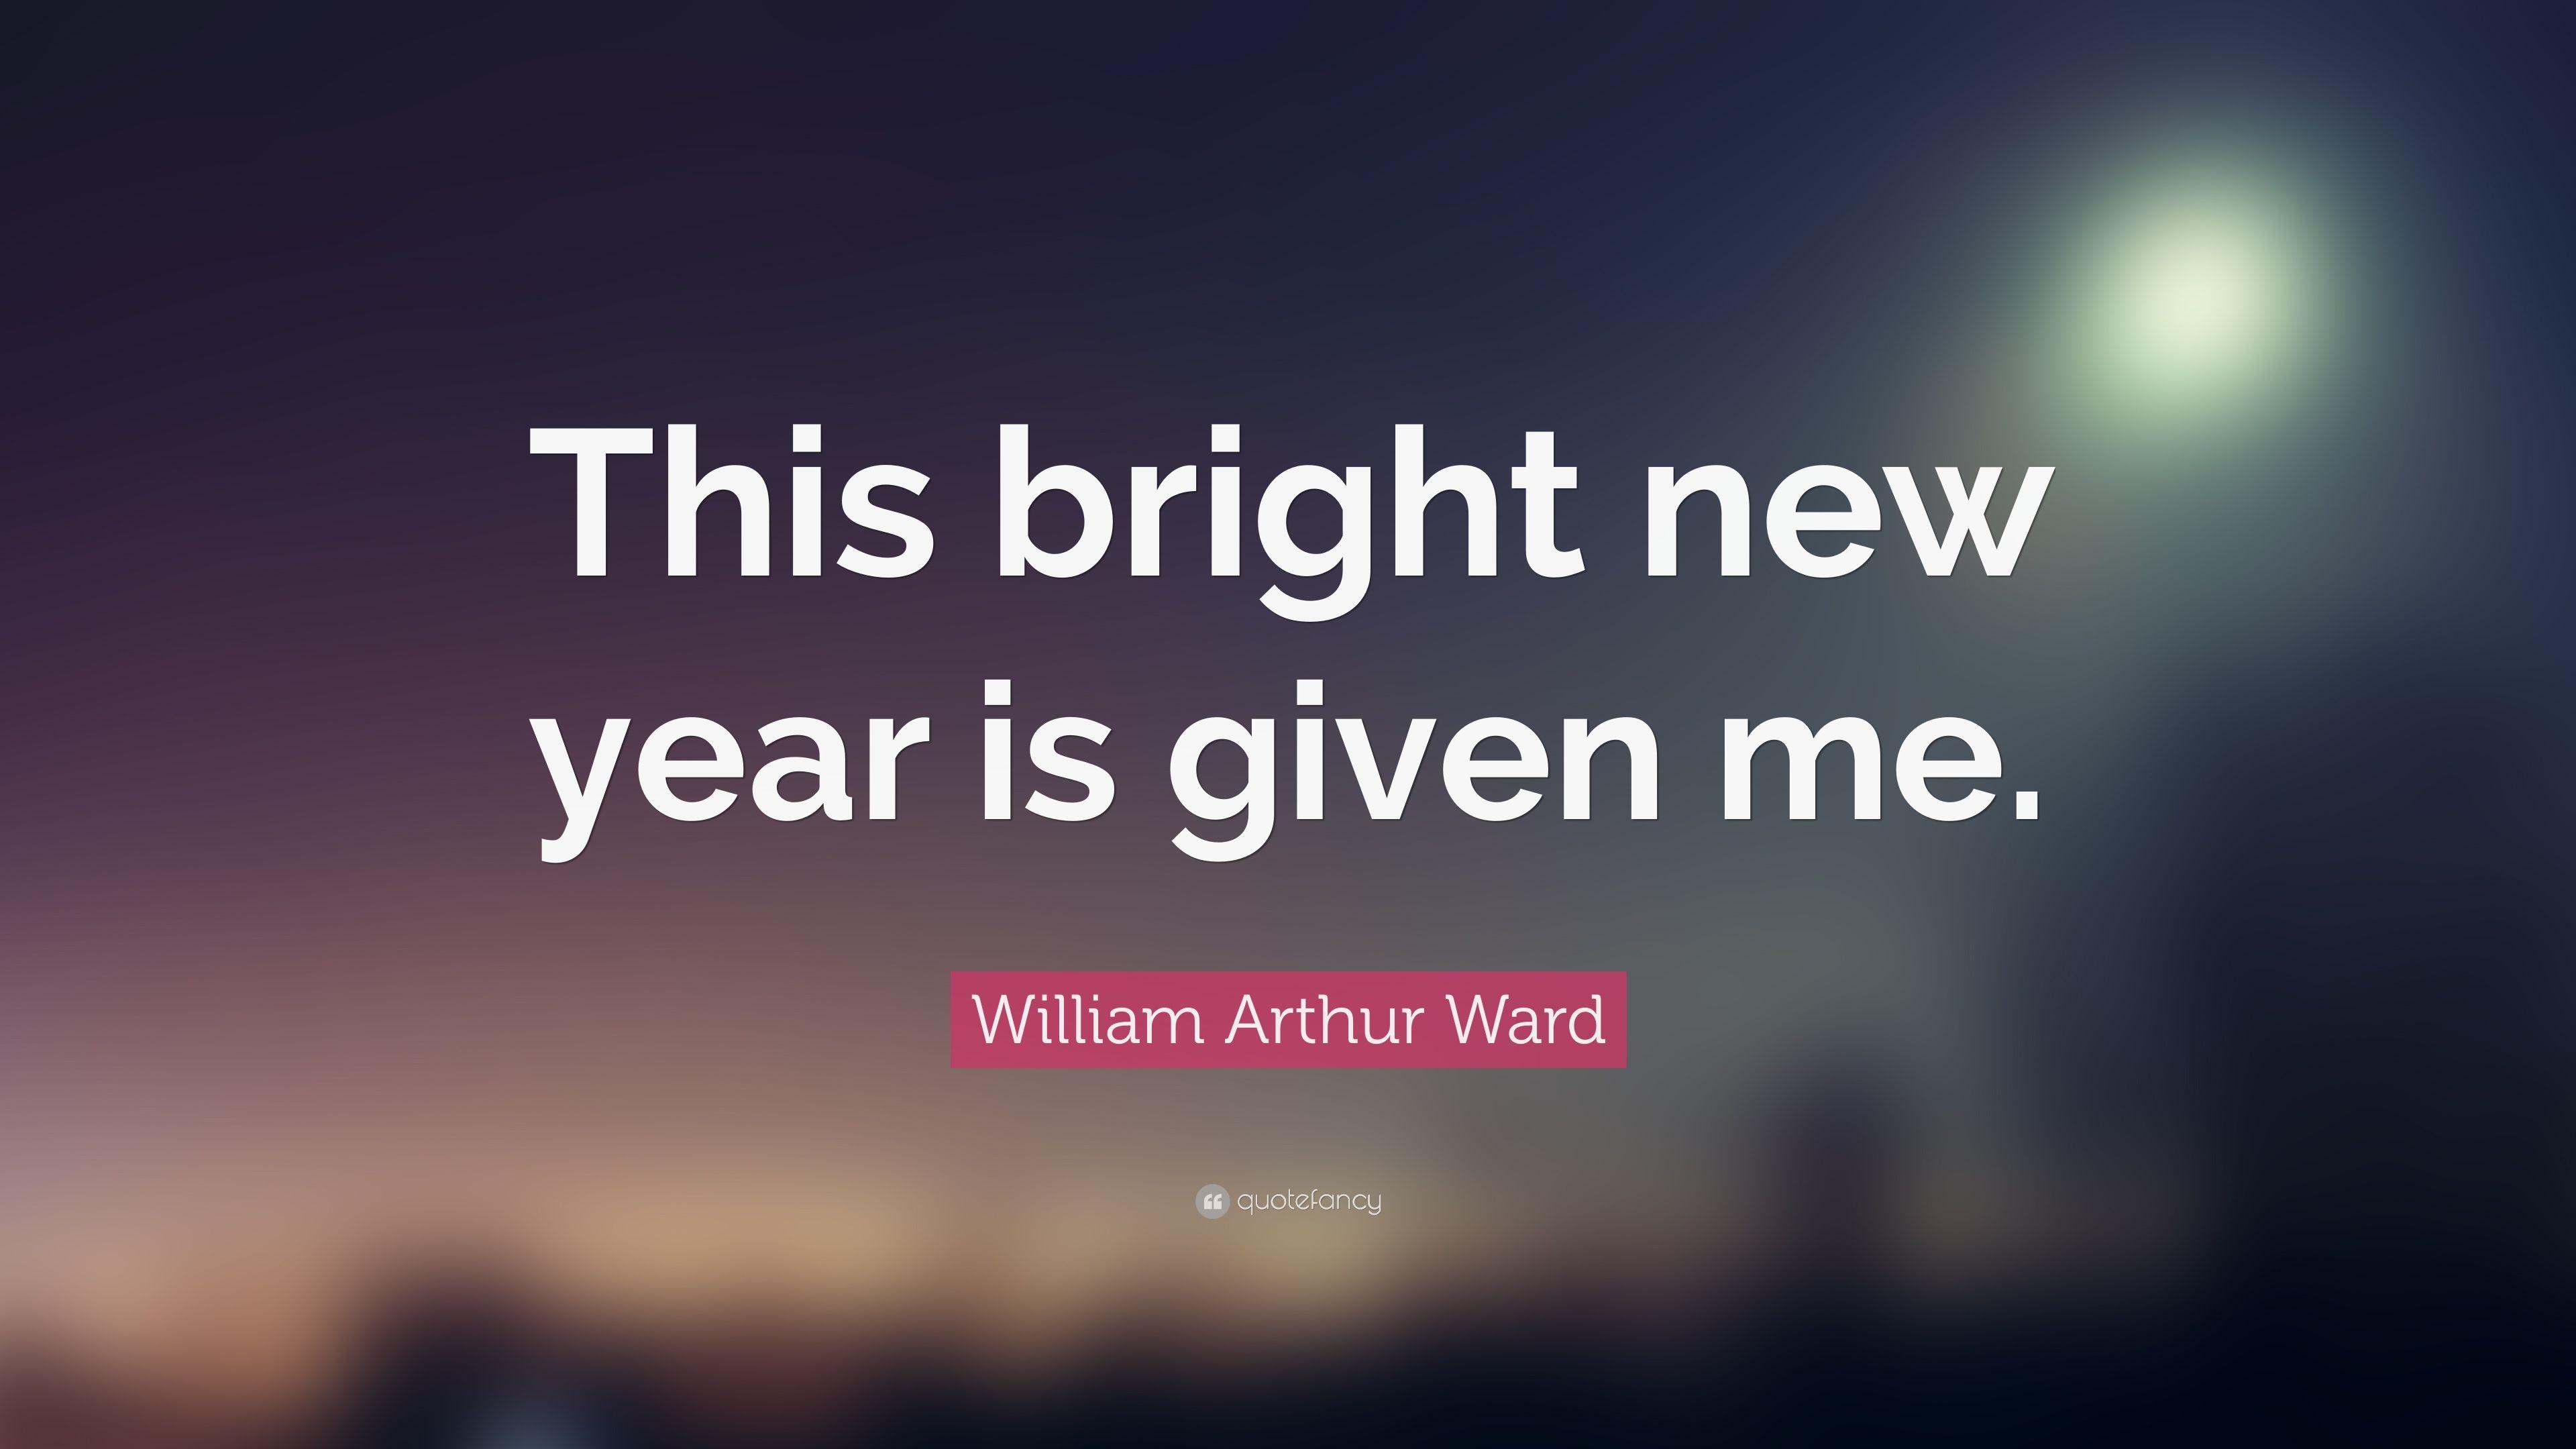 William Arthur Ward Quote: “This bright new year is given me.” 10